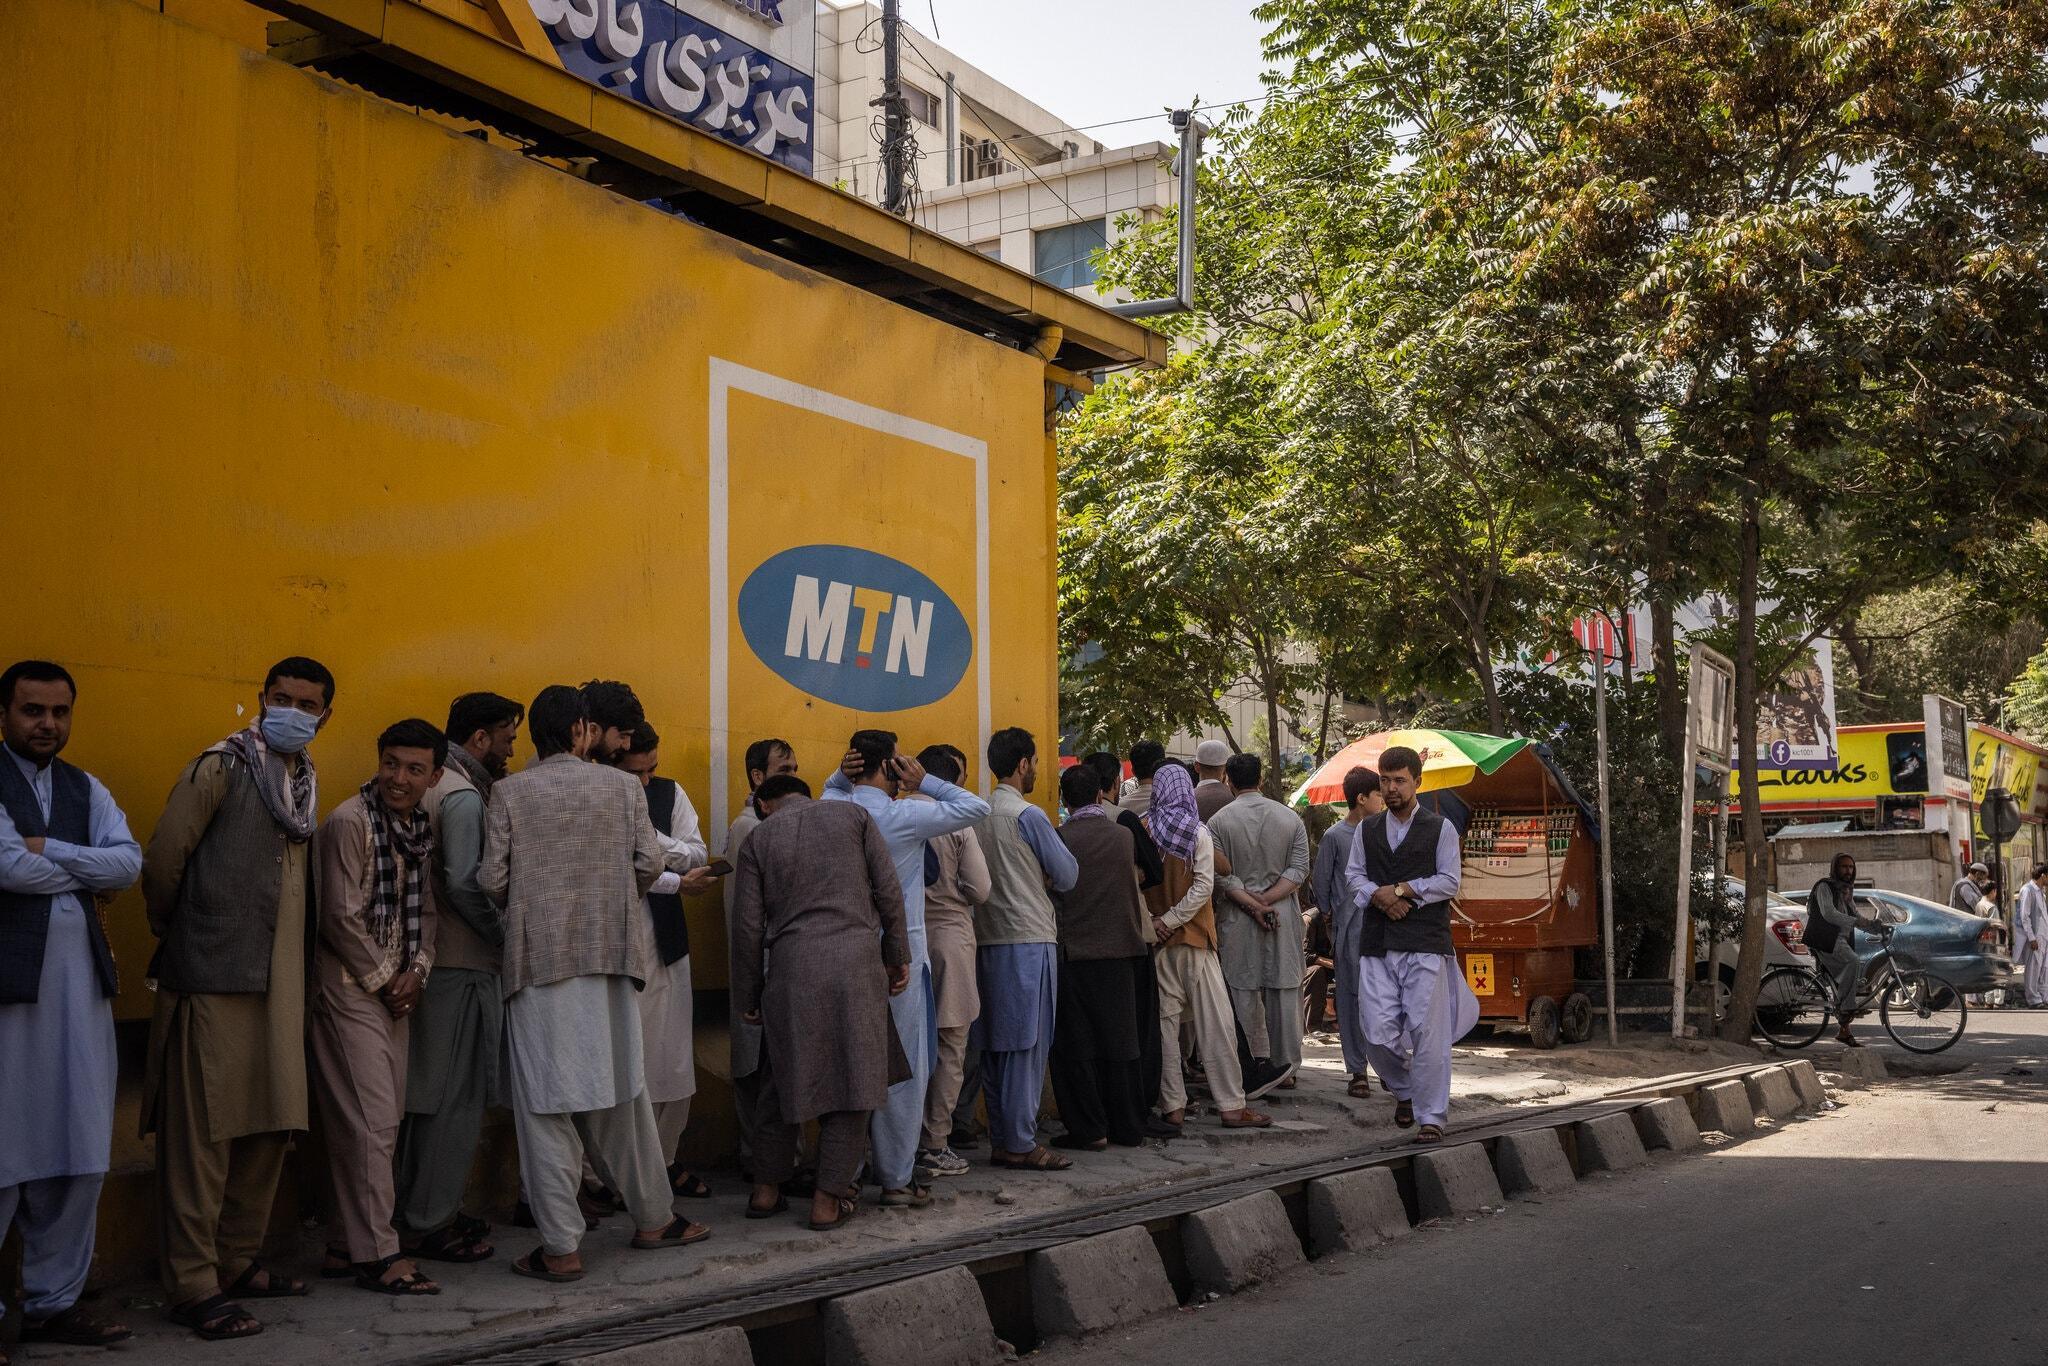 People stood in line outside Azizi bank in Kabul on Sunday, the first day banks reopened in Afghanistan’s capital.Credit...Jim Huylebroek for The New York Times